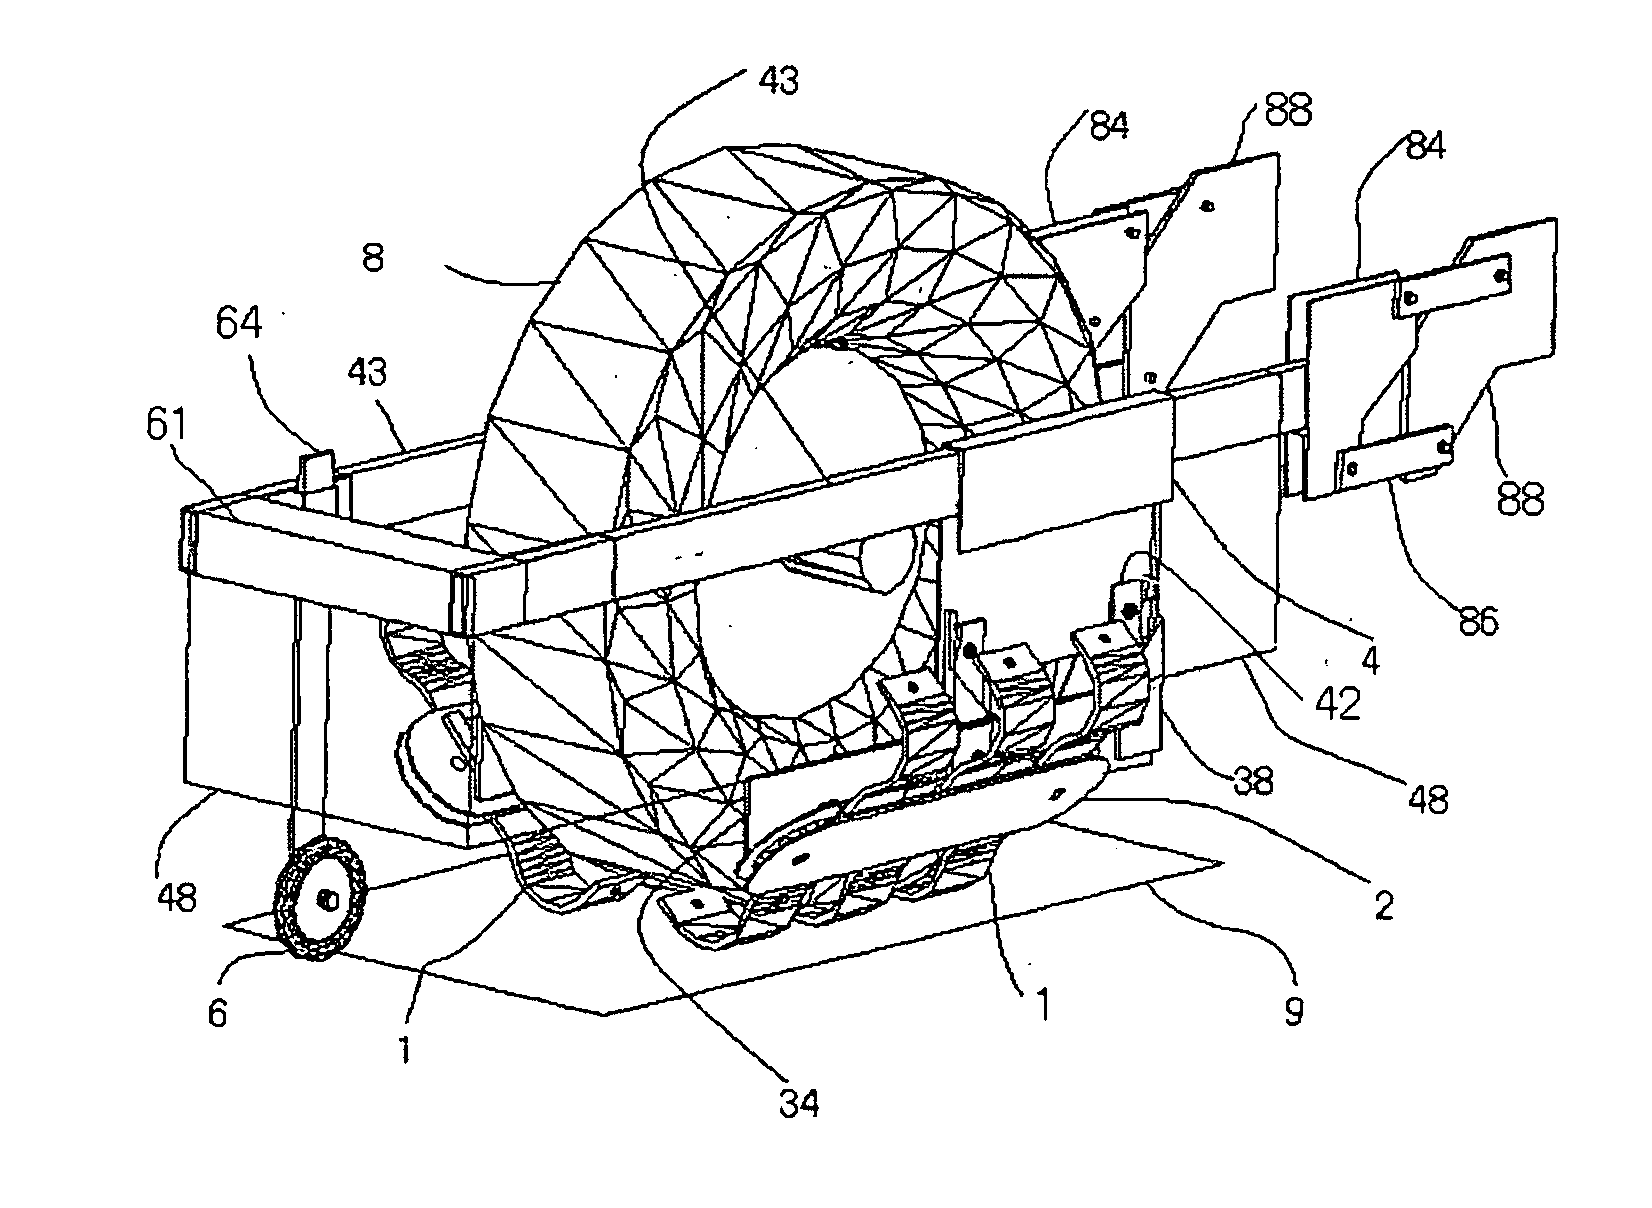 Control device for tread contact conditions of vehicles